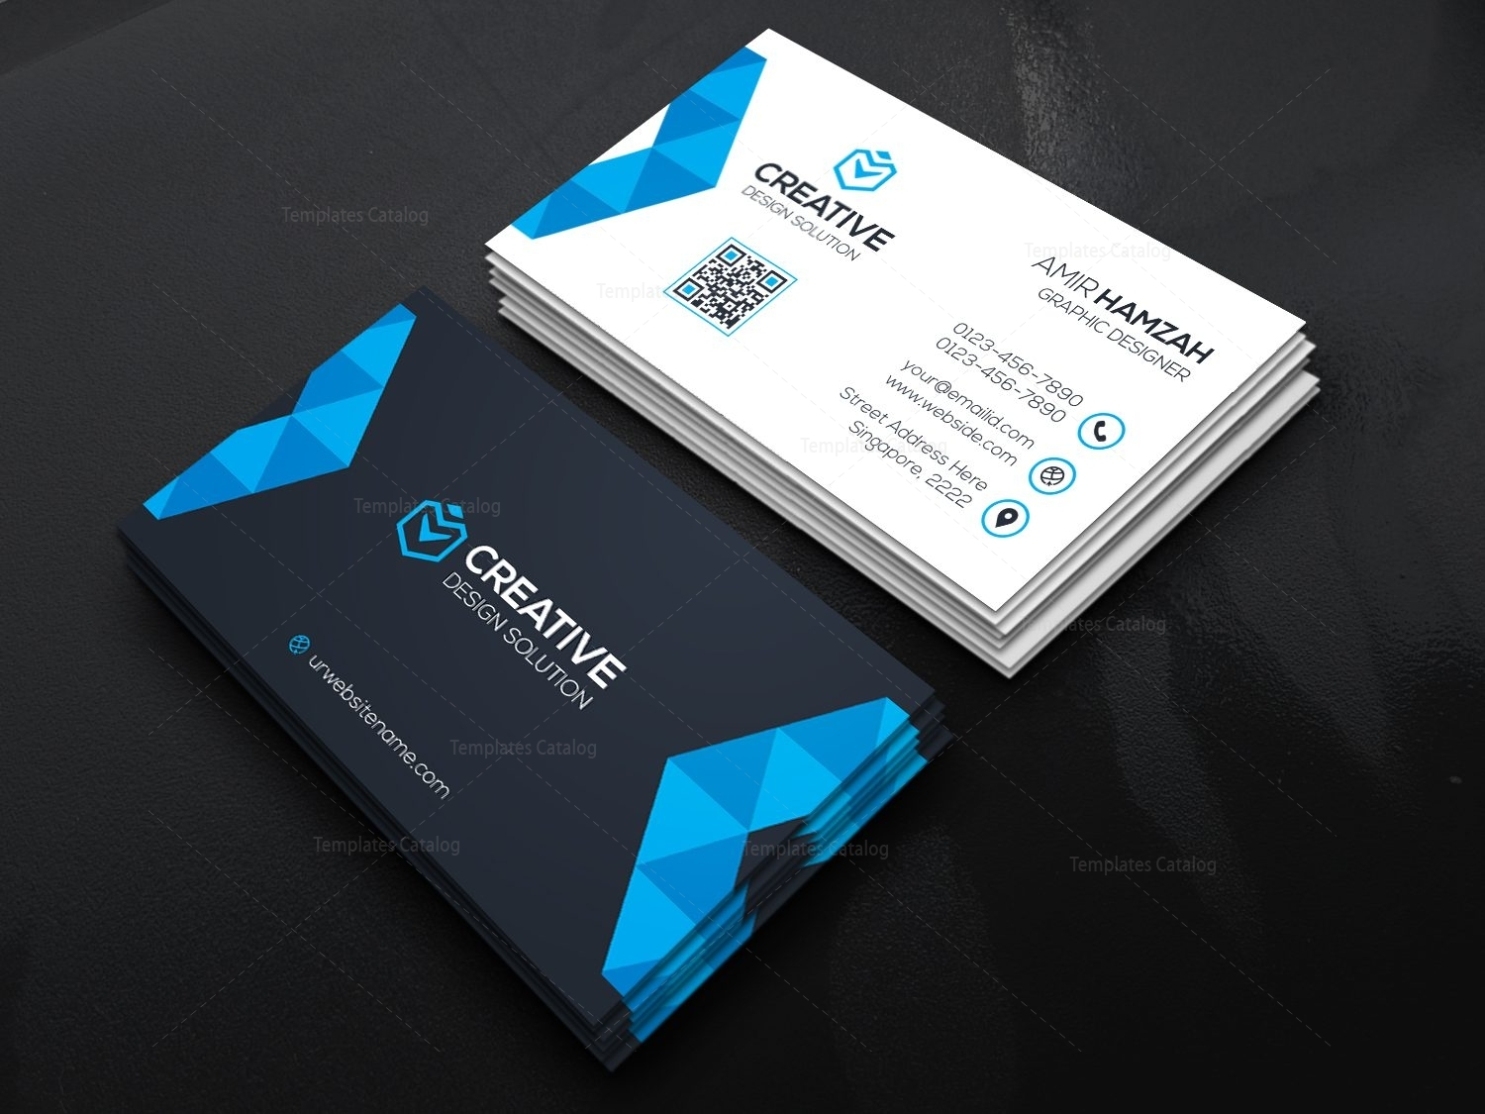 Creative Business Card Design 000469 – Template Catalog For Company Business Cards Templates